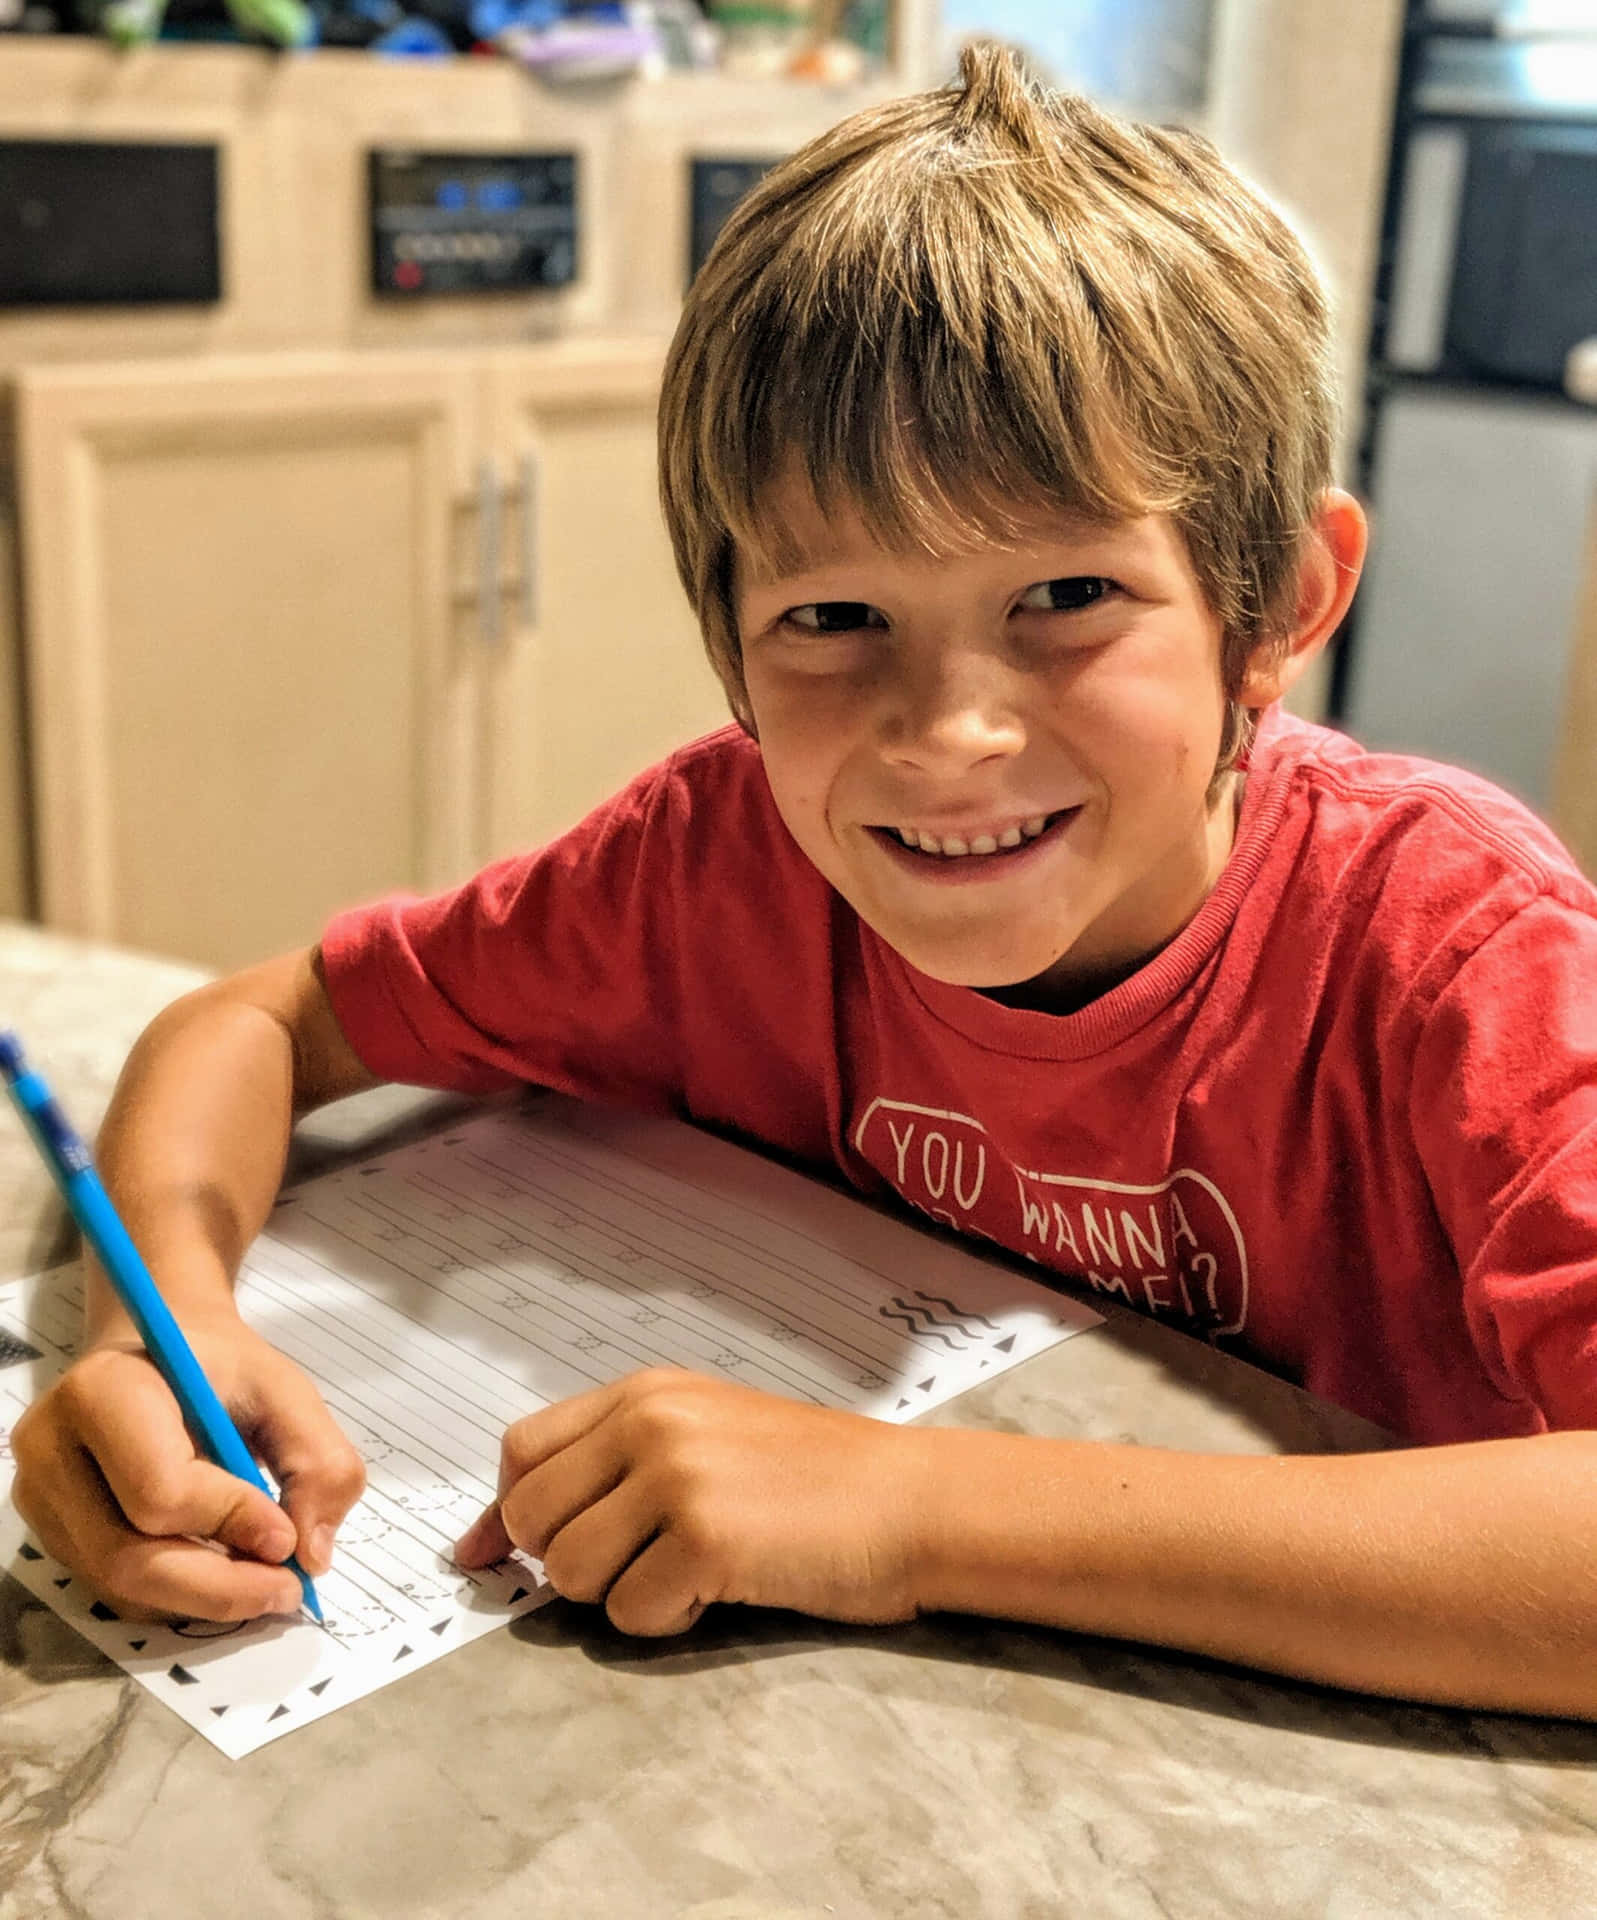 A Boy Smiling While Writing On A Piece Of Paper